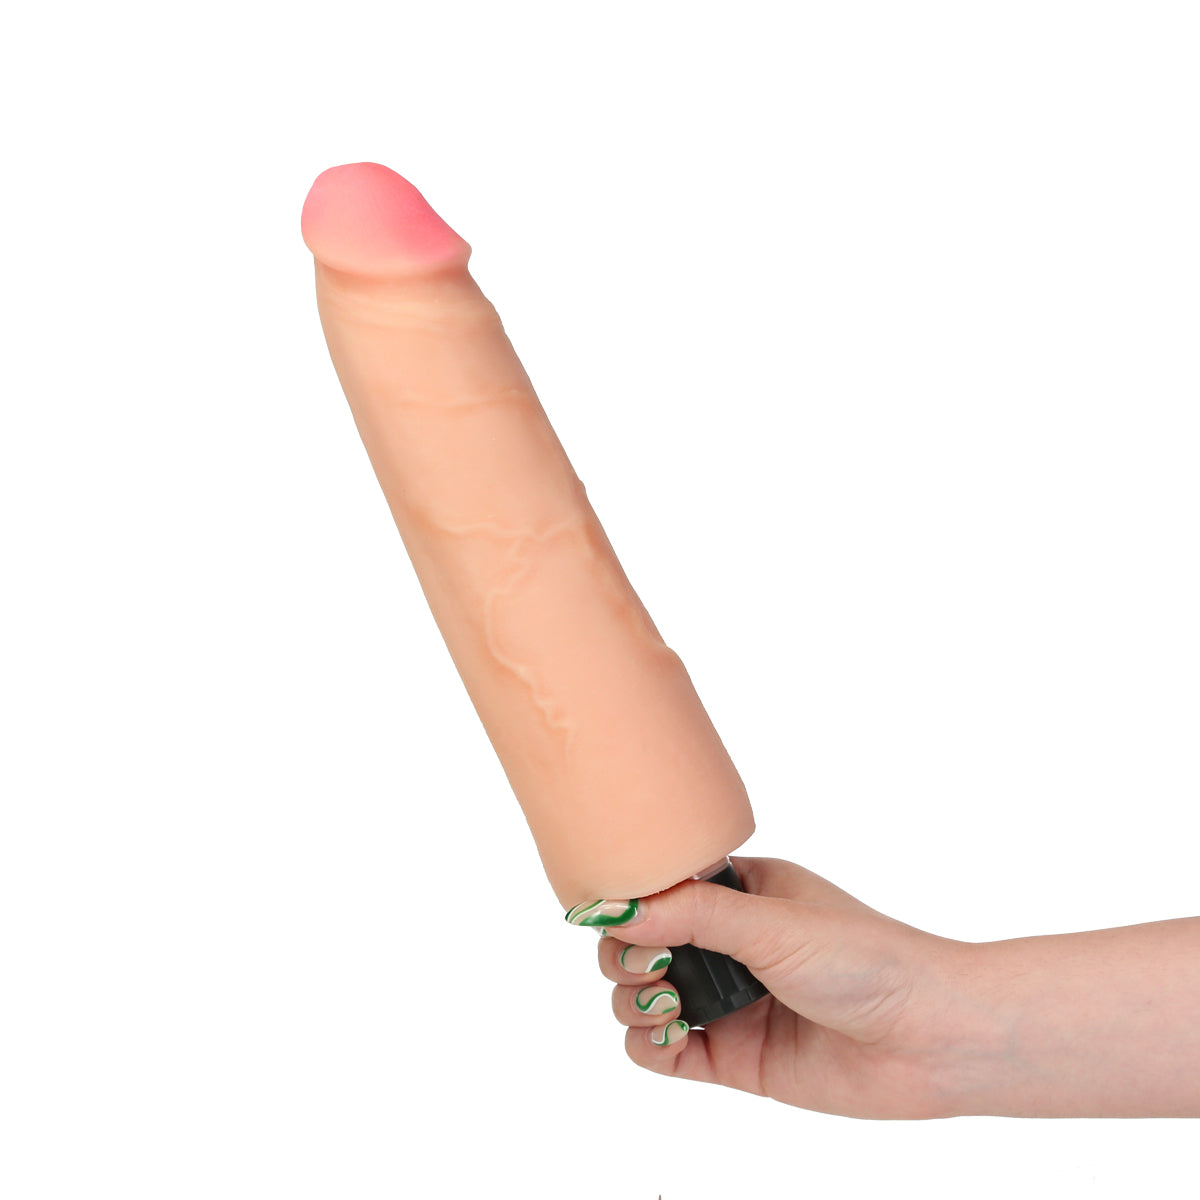 Pipedream - Real Feel 10 -  Vibrating Dildo –  10.5&quot; - Beige